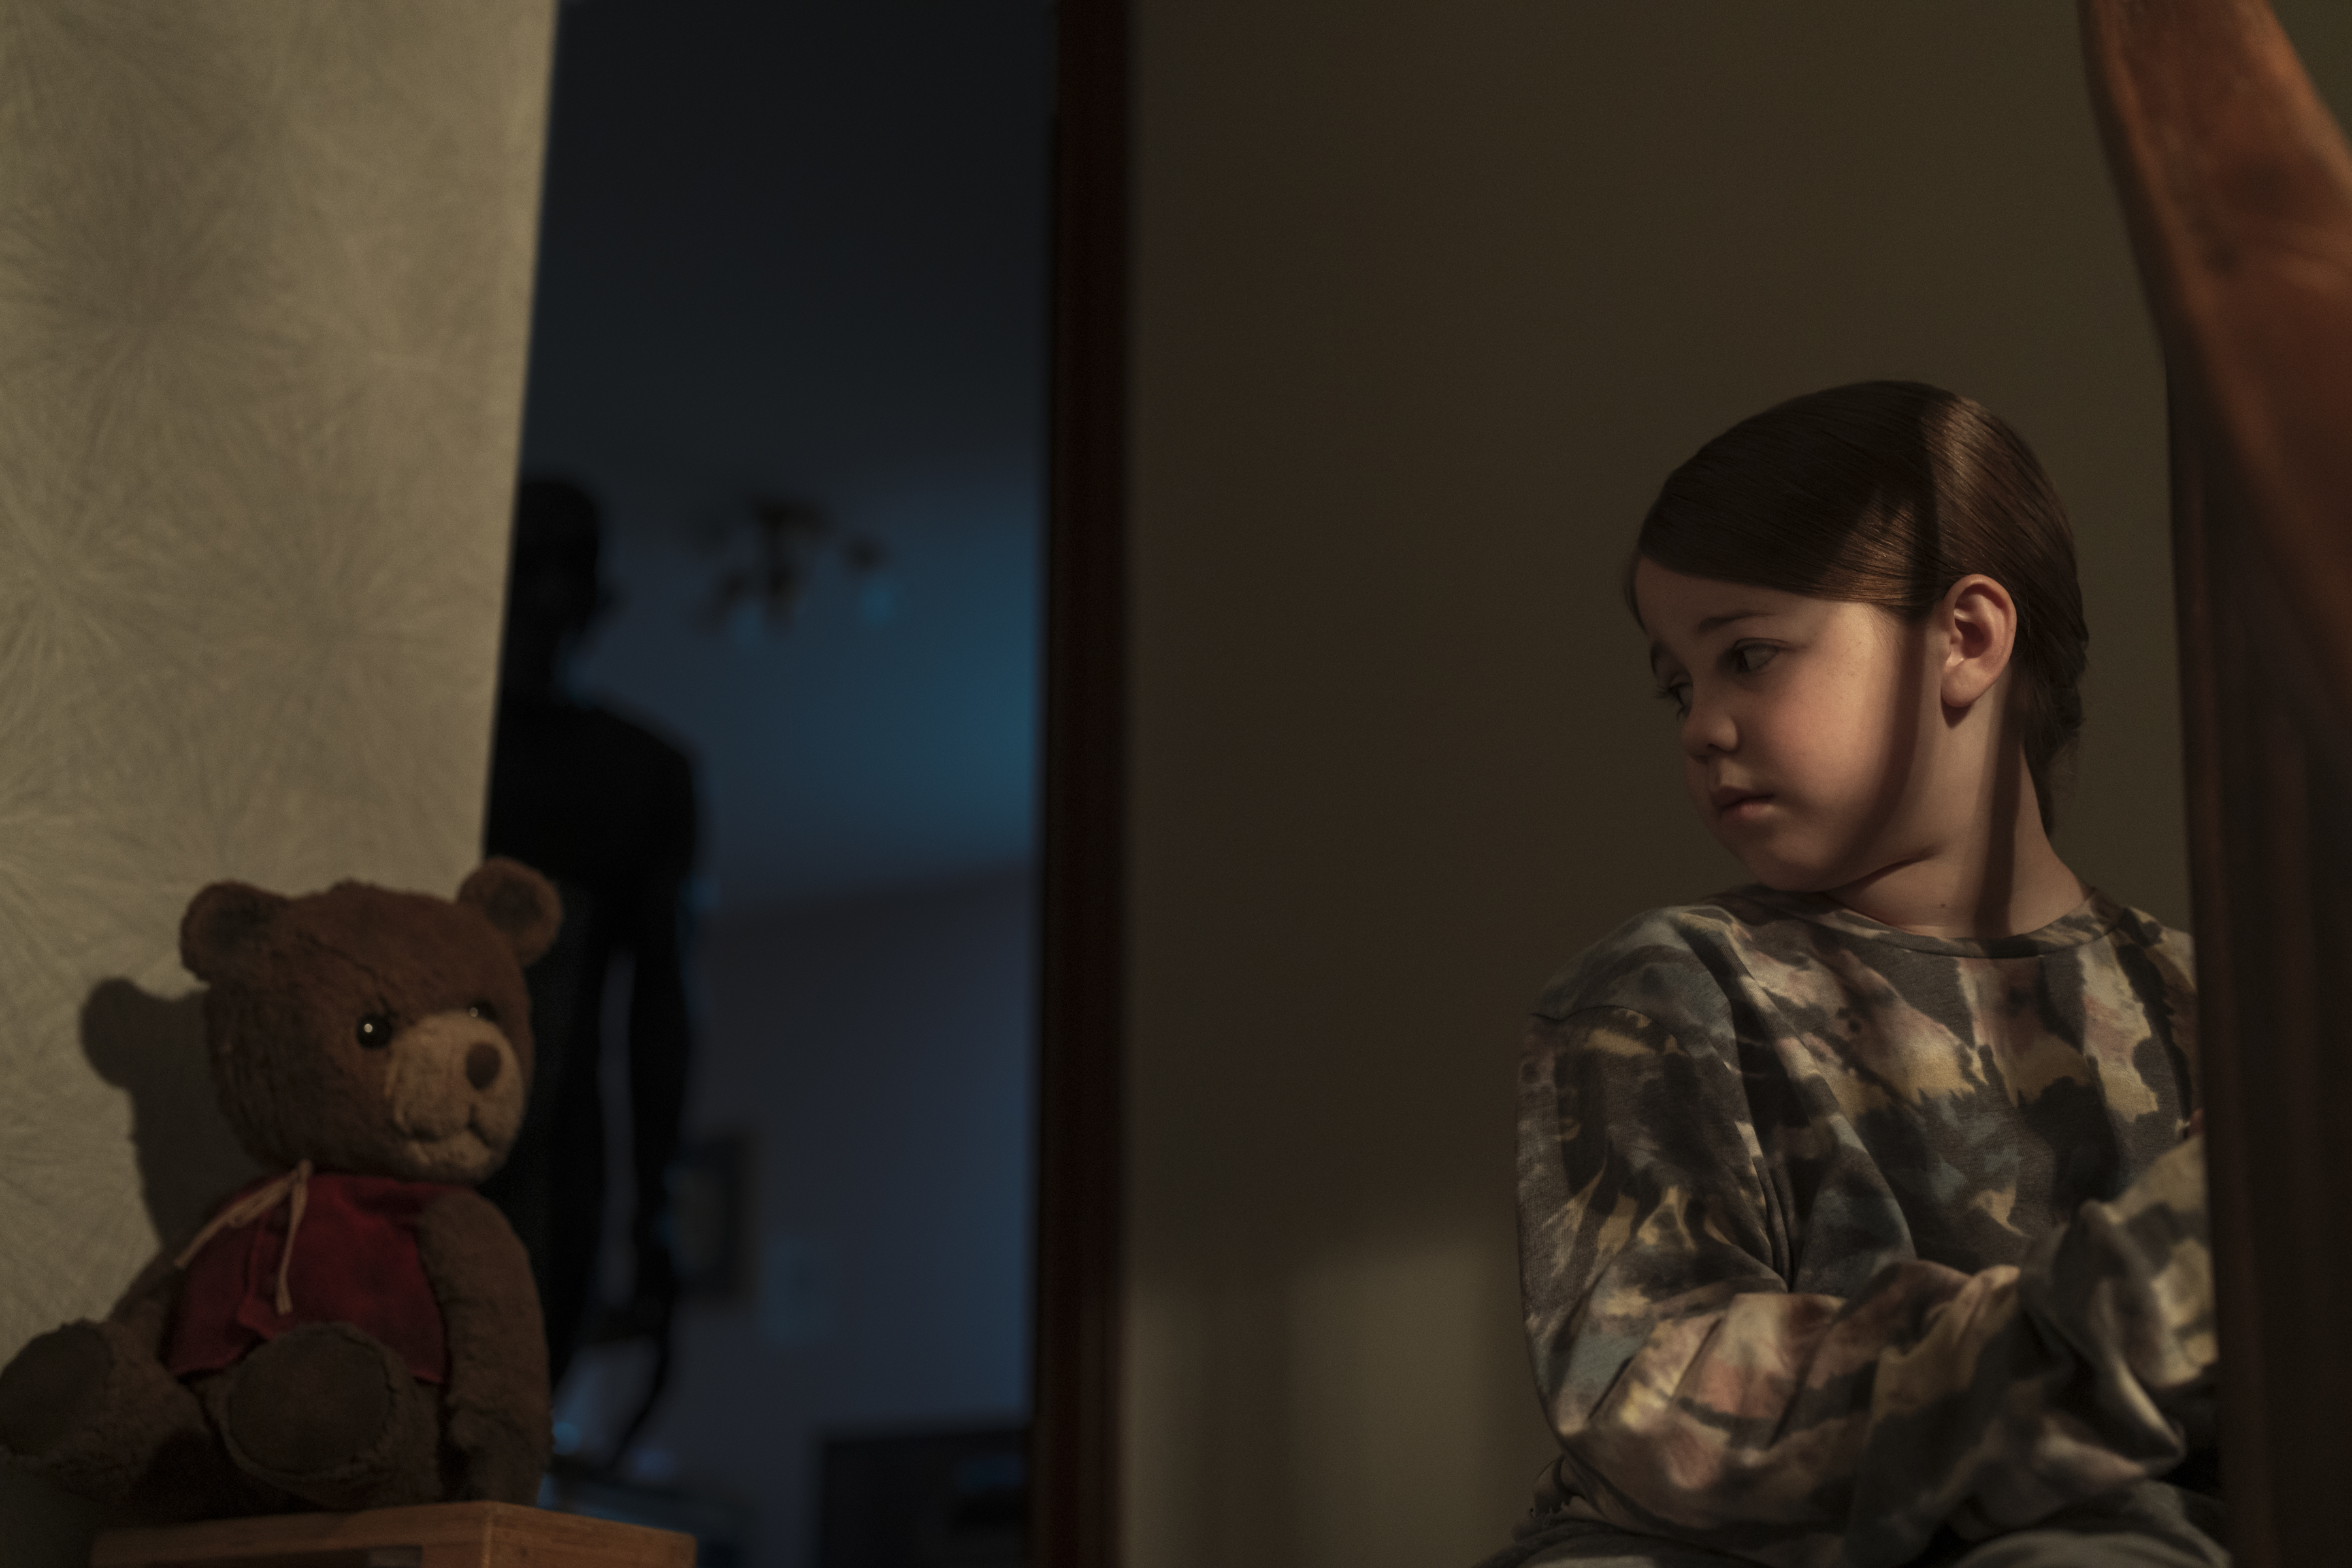 in a dark room a child looks suspiciously at her stuffed teddy